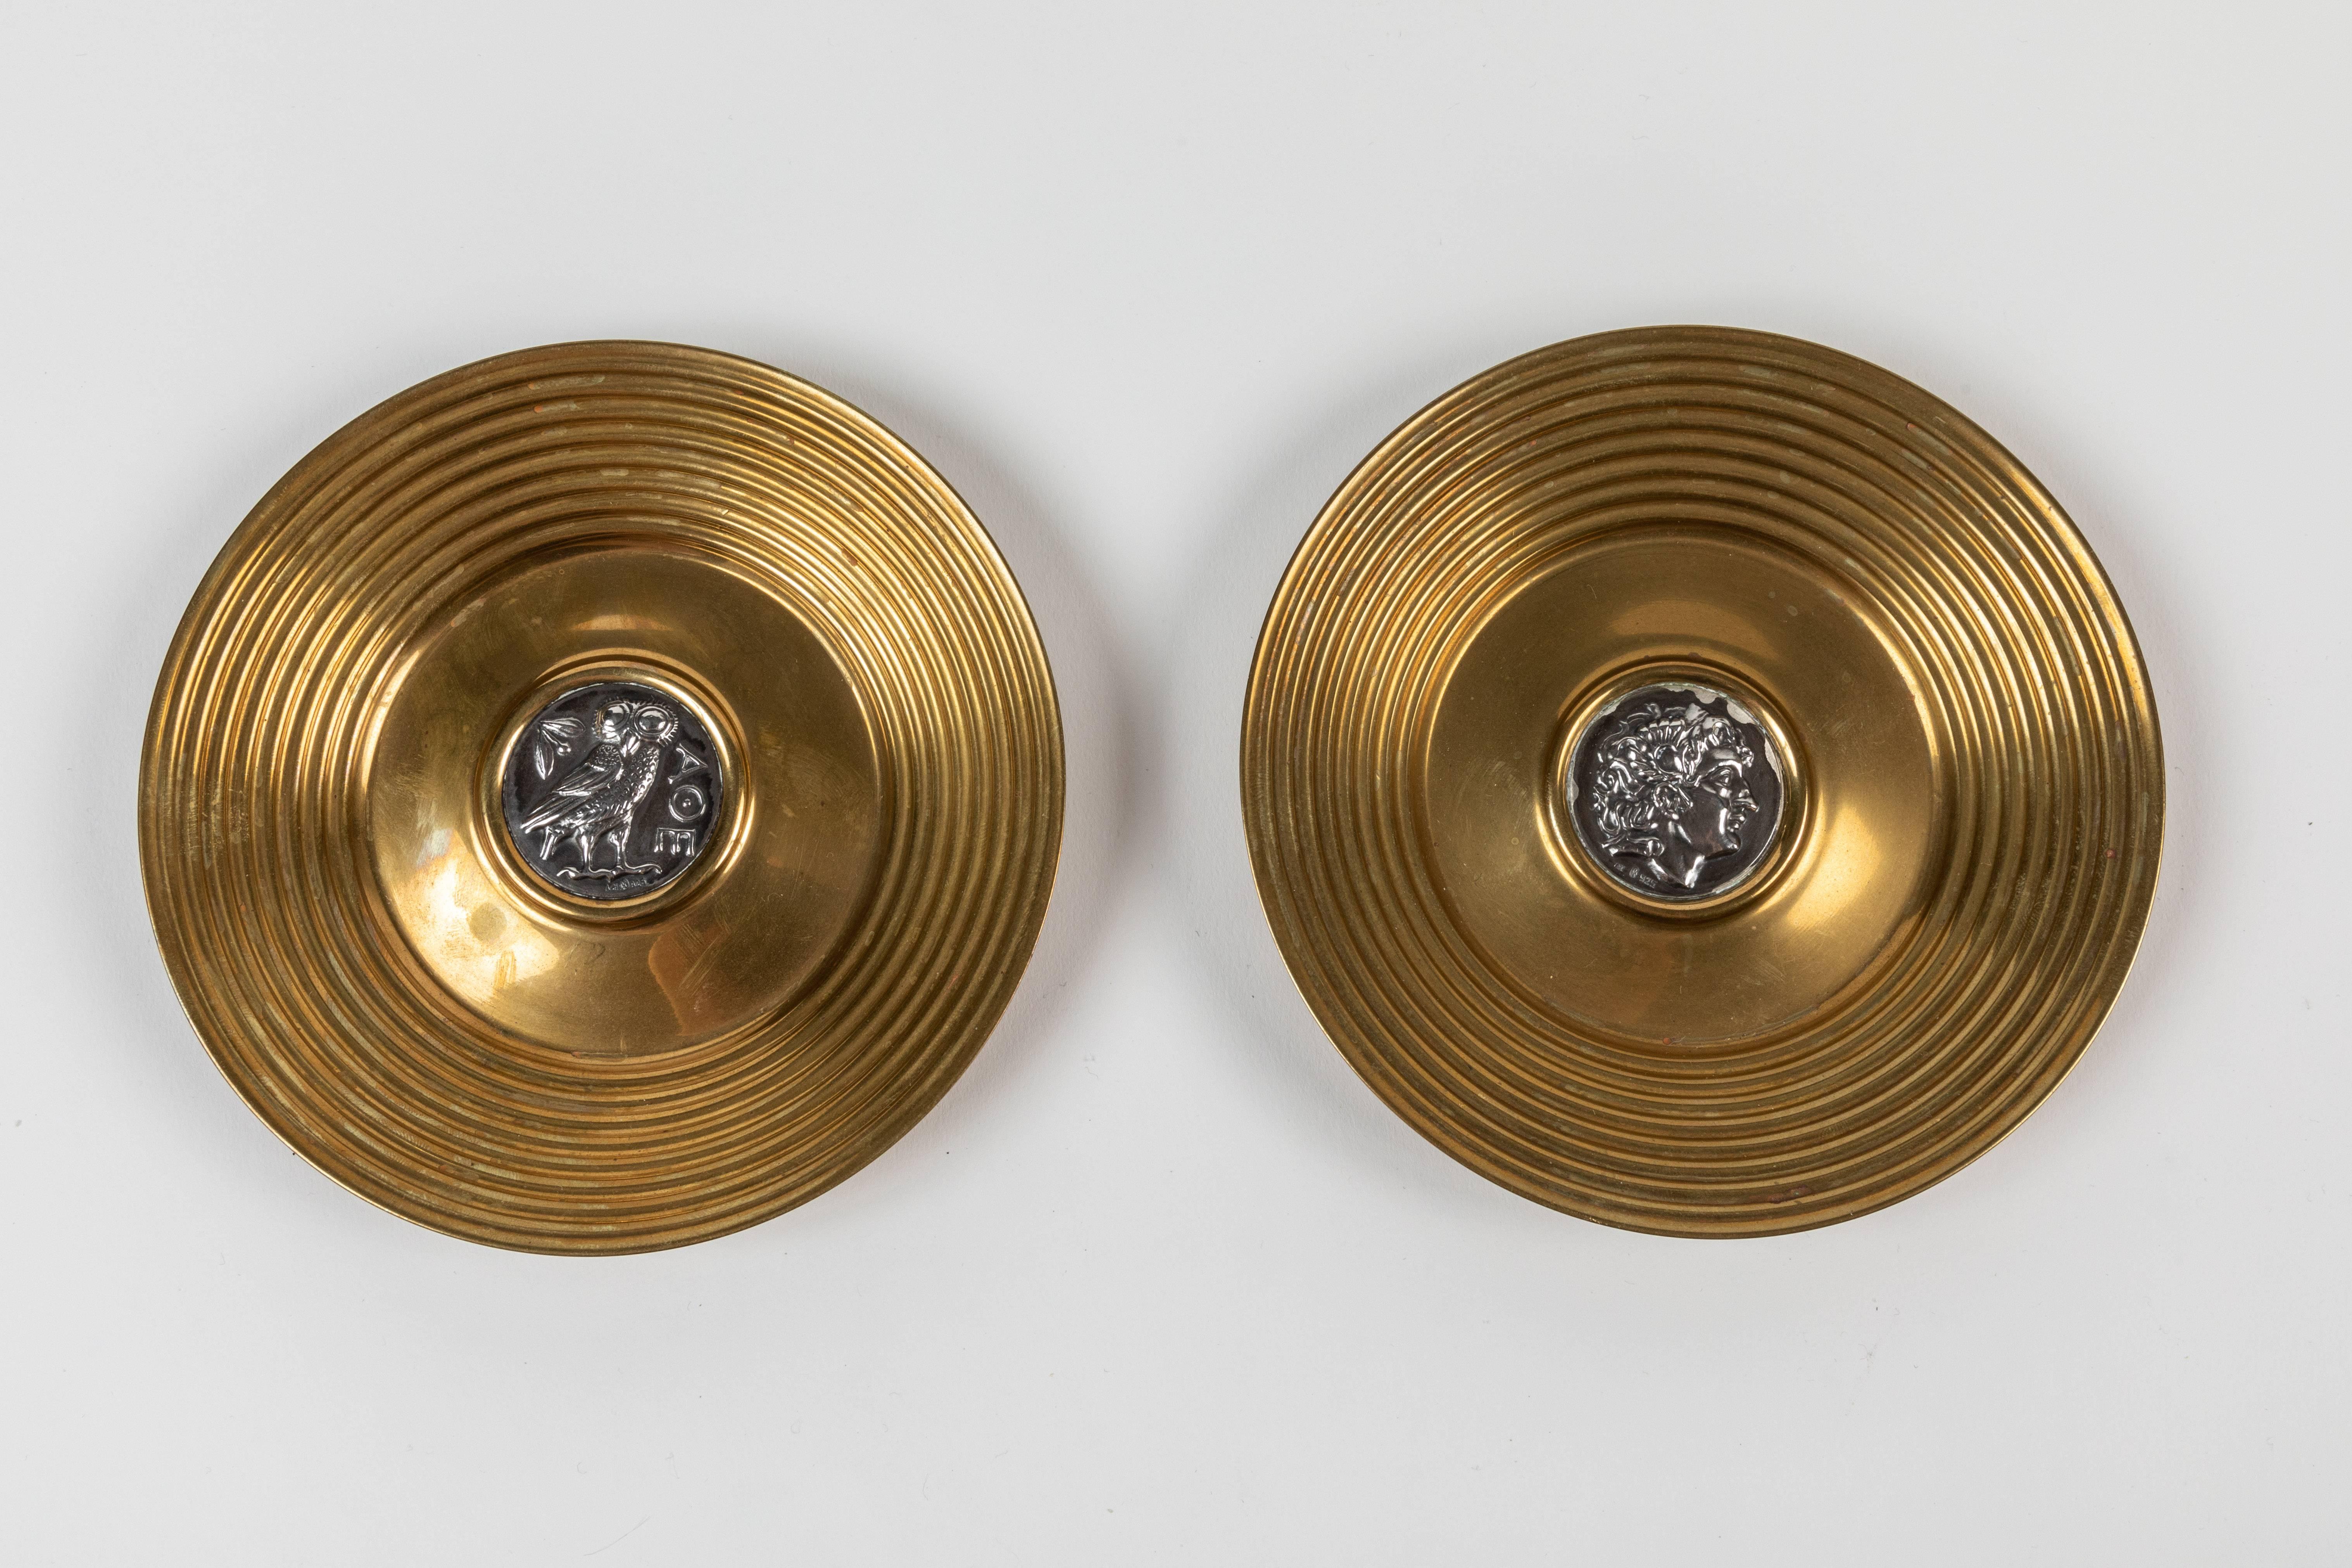 Pair of vintage brass and sterling silver trinket dishes by Ilias Lalaounis, Greece. A sterling silver Greek coin (replica) is set in the middle of each dish. One coin features 